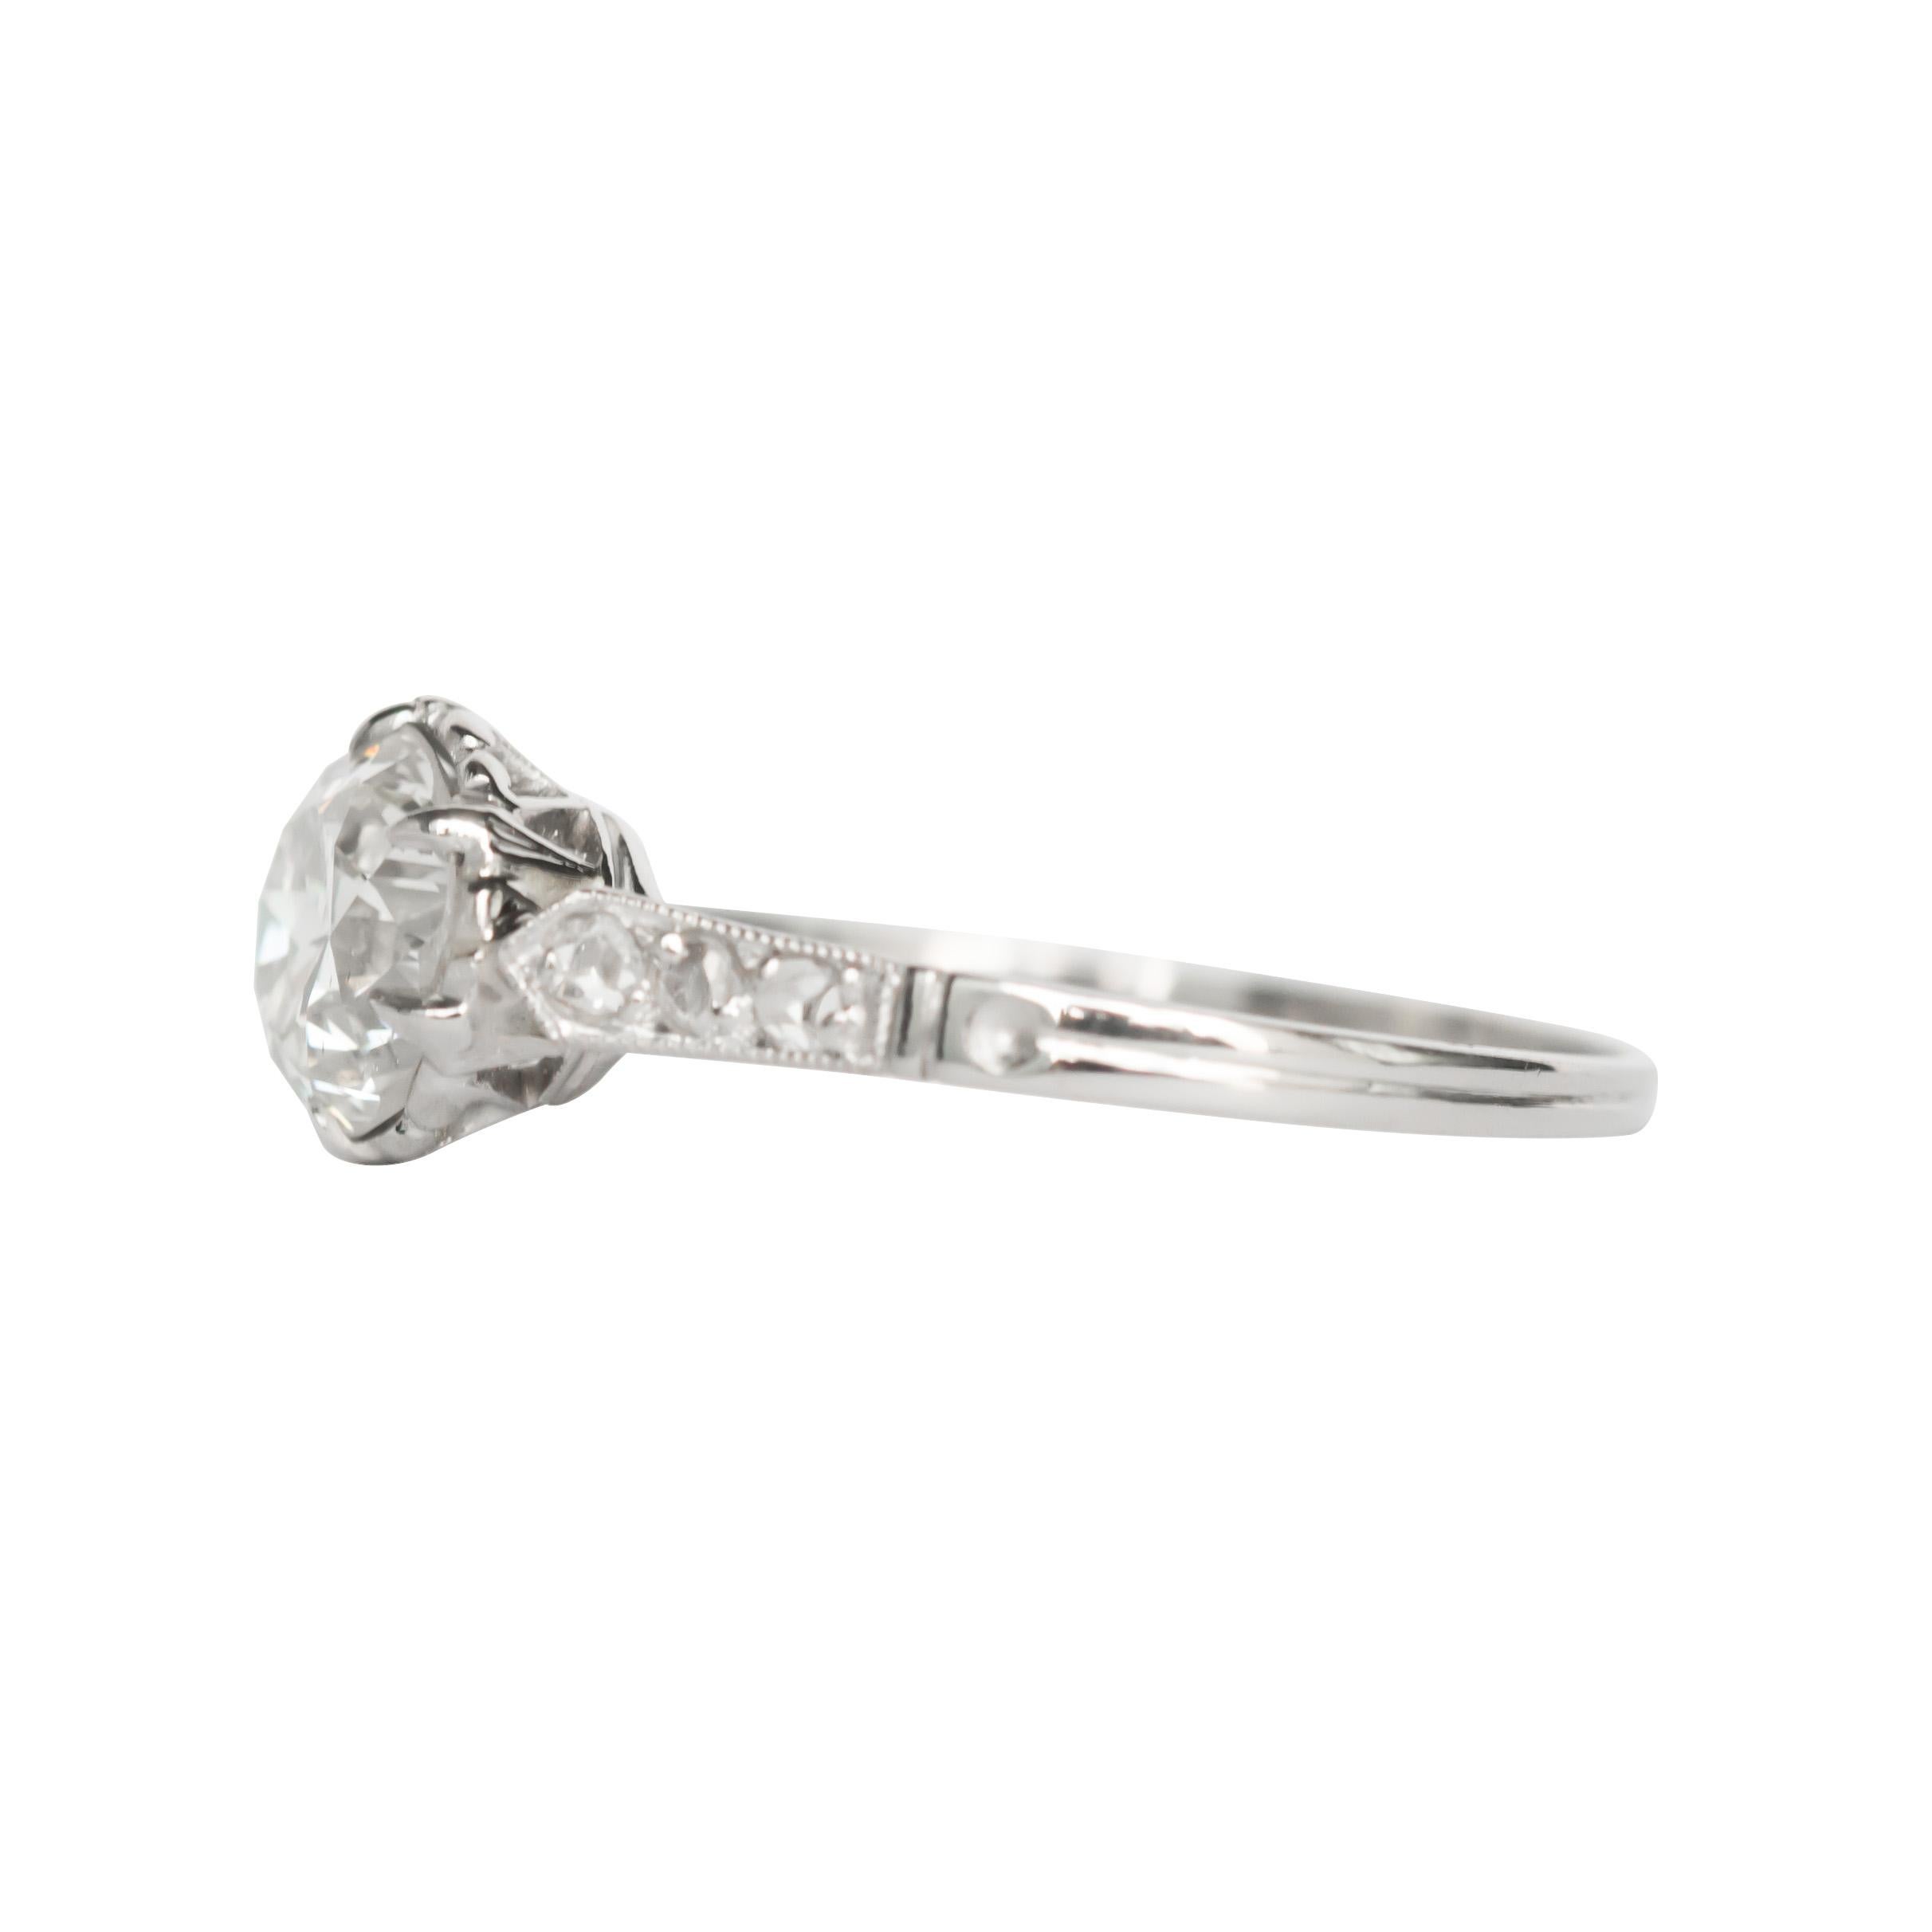 Ring Size: 8
Metal Type: Platinum 
Weight: 2.7 grams

Center Diamond Details
Shape: Old European Brilliant 
Carat Weight: 1.45 carat 
Color: J
Clarity:SI2

Side Stone Details: 
Shape: Rose Cut 
Total Carat Weight: .08 carat, total weight
Color: